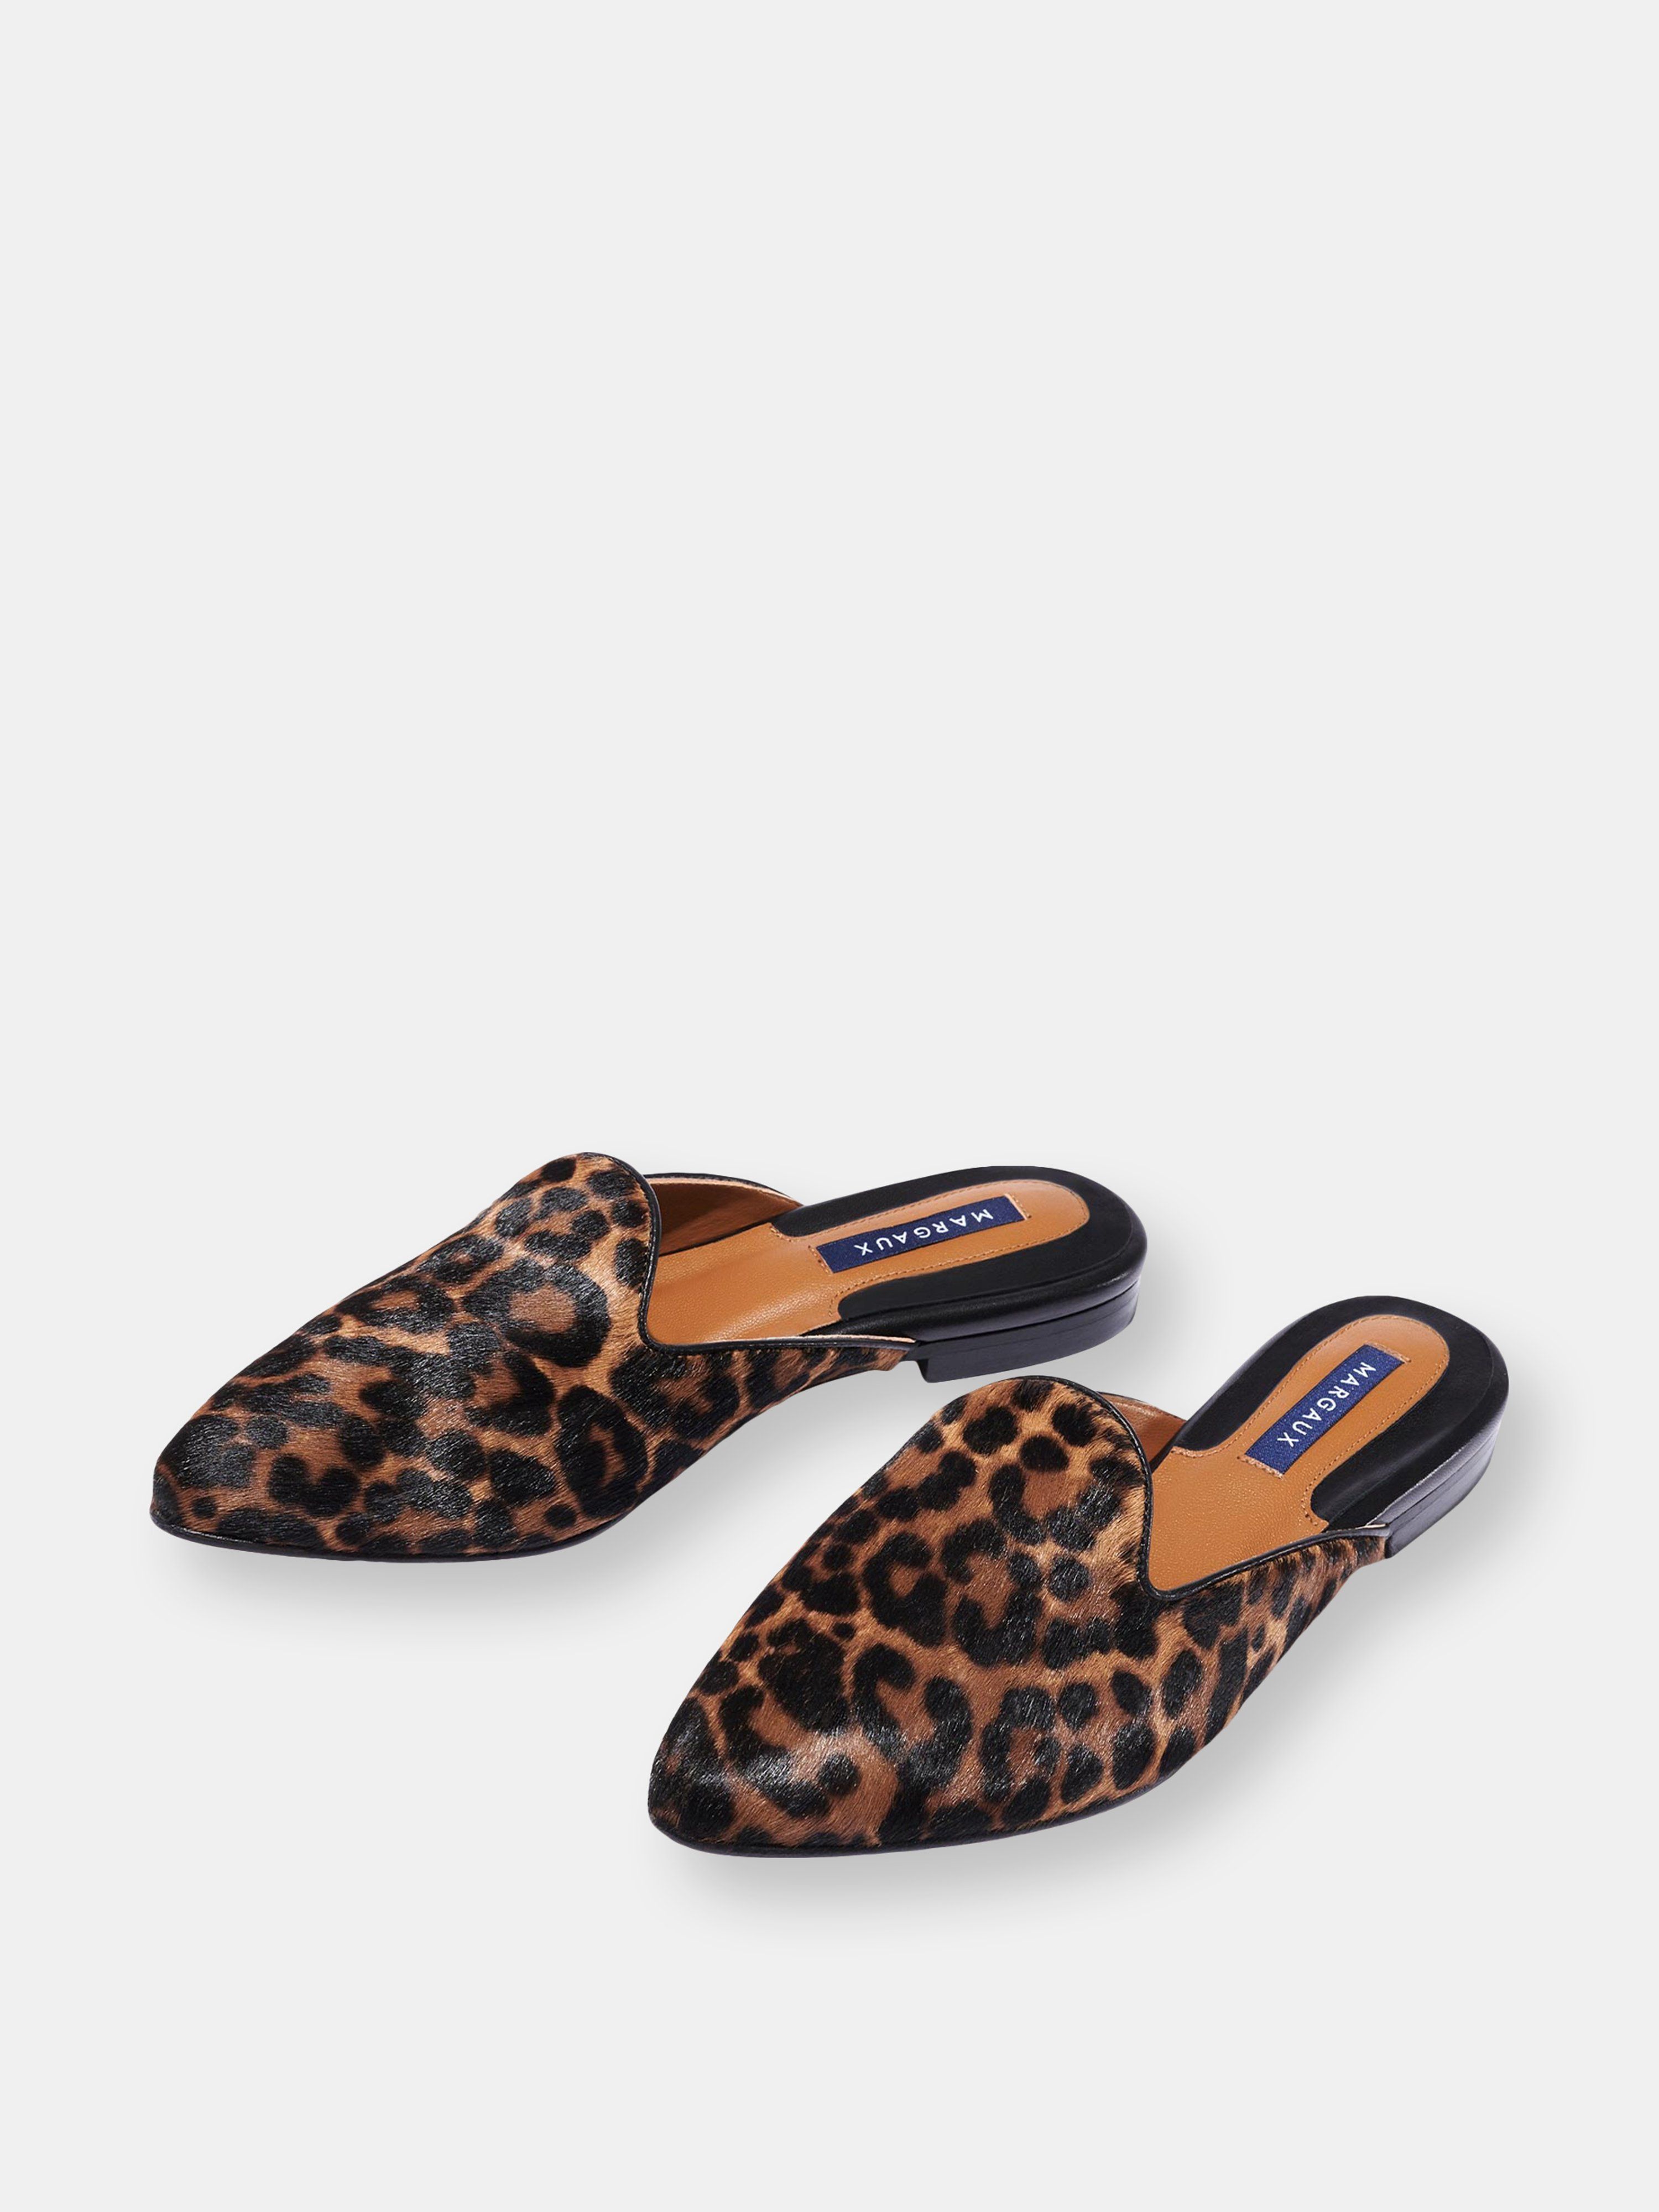 The Mule - Leopard Haircalf - 36.5 - Also in: 39, 38.5, 37.5, 38, 36, 35.5, 41, 35, 37 | Verishop